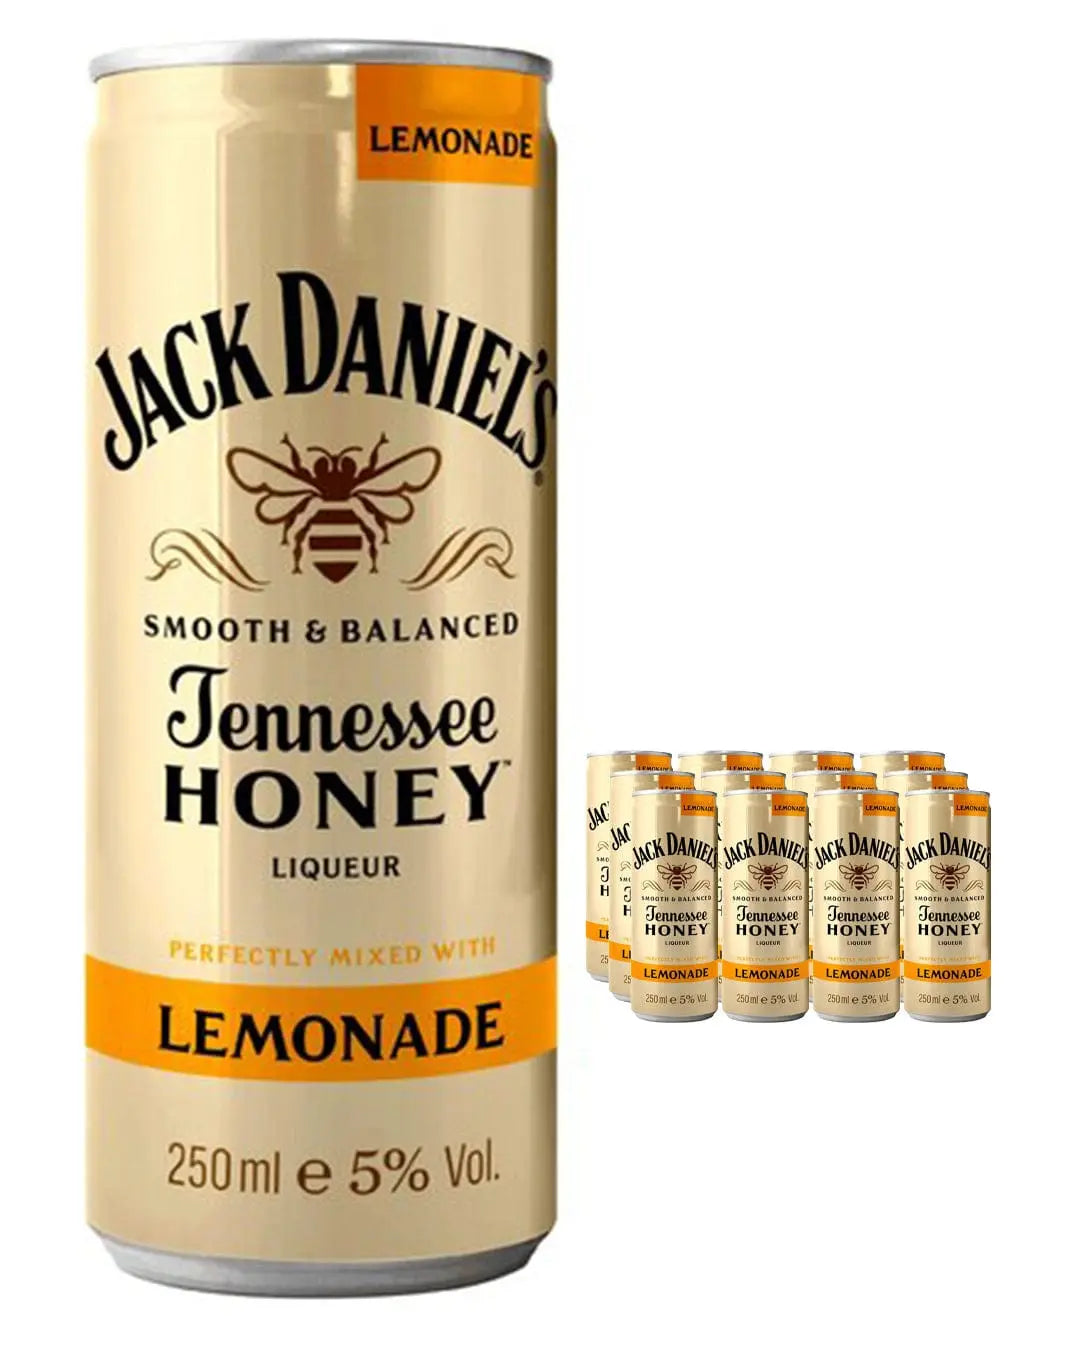 Jack Daniel's Tennessee Honey Whiskey and Lemonade Premixed Cocktail Price Marked Multipack, 12 x 250 ml Ready Made Cocktails